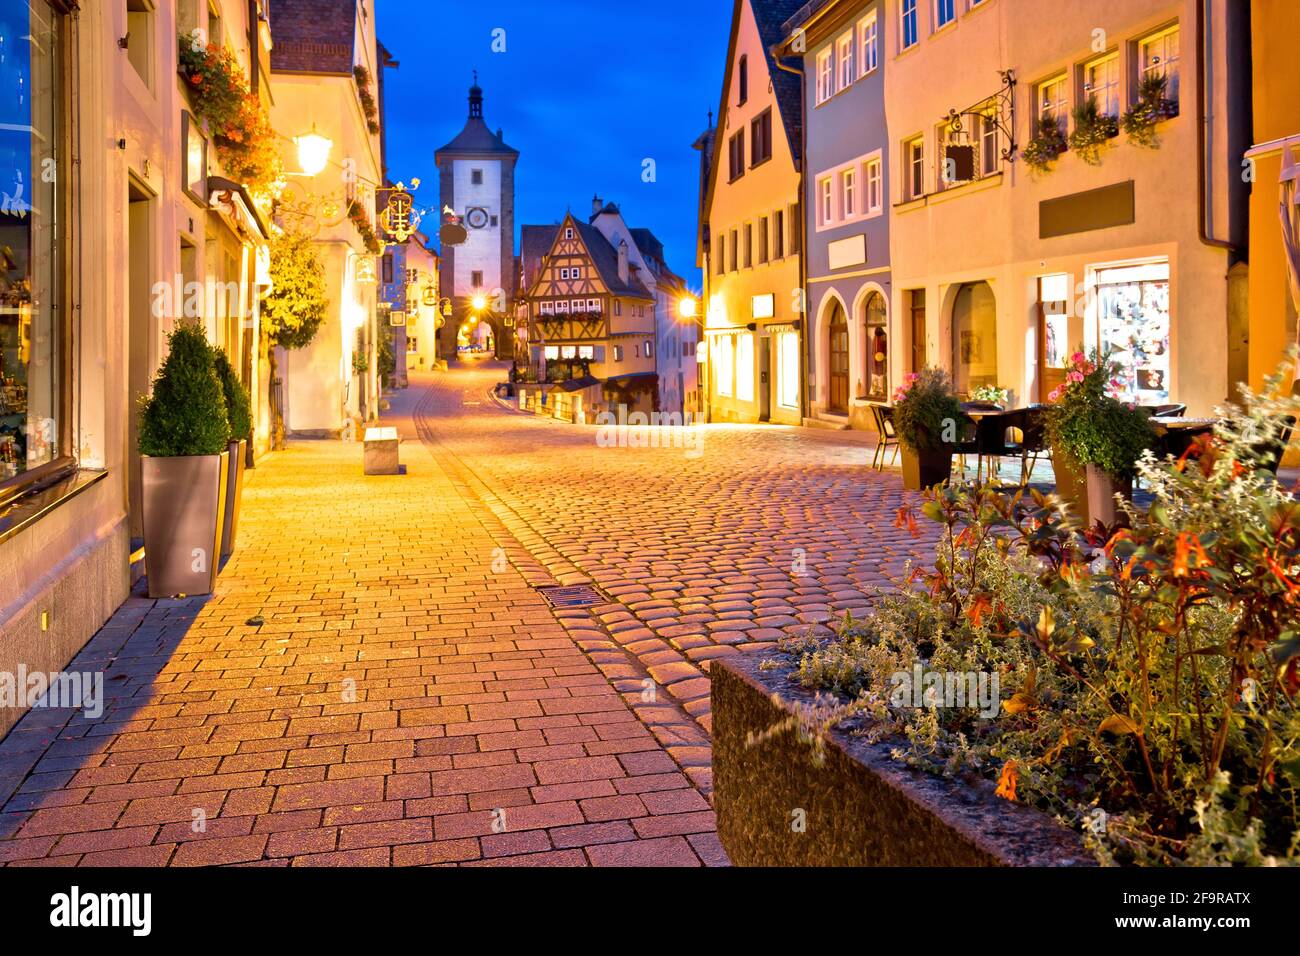 Cobbled street of historic town of Rothenburg ob der Tauber evening view, Romantic road of Bavaria region of Germany Stock Photo